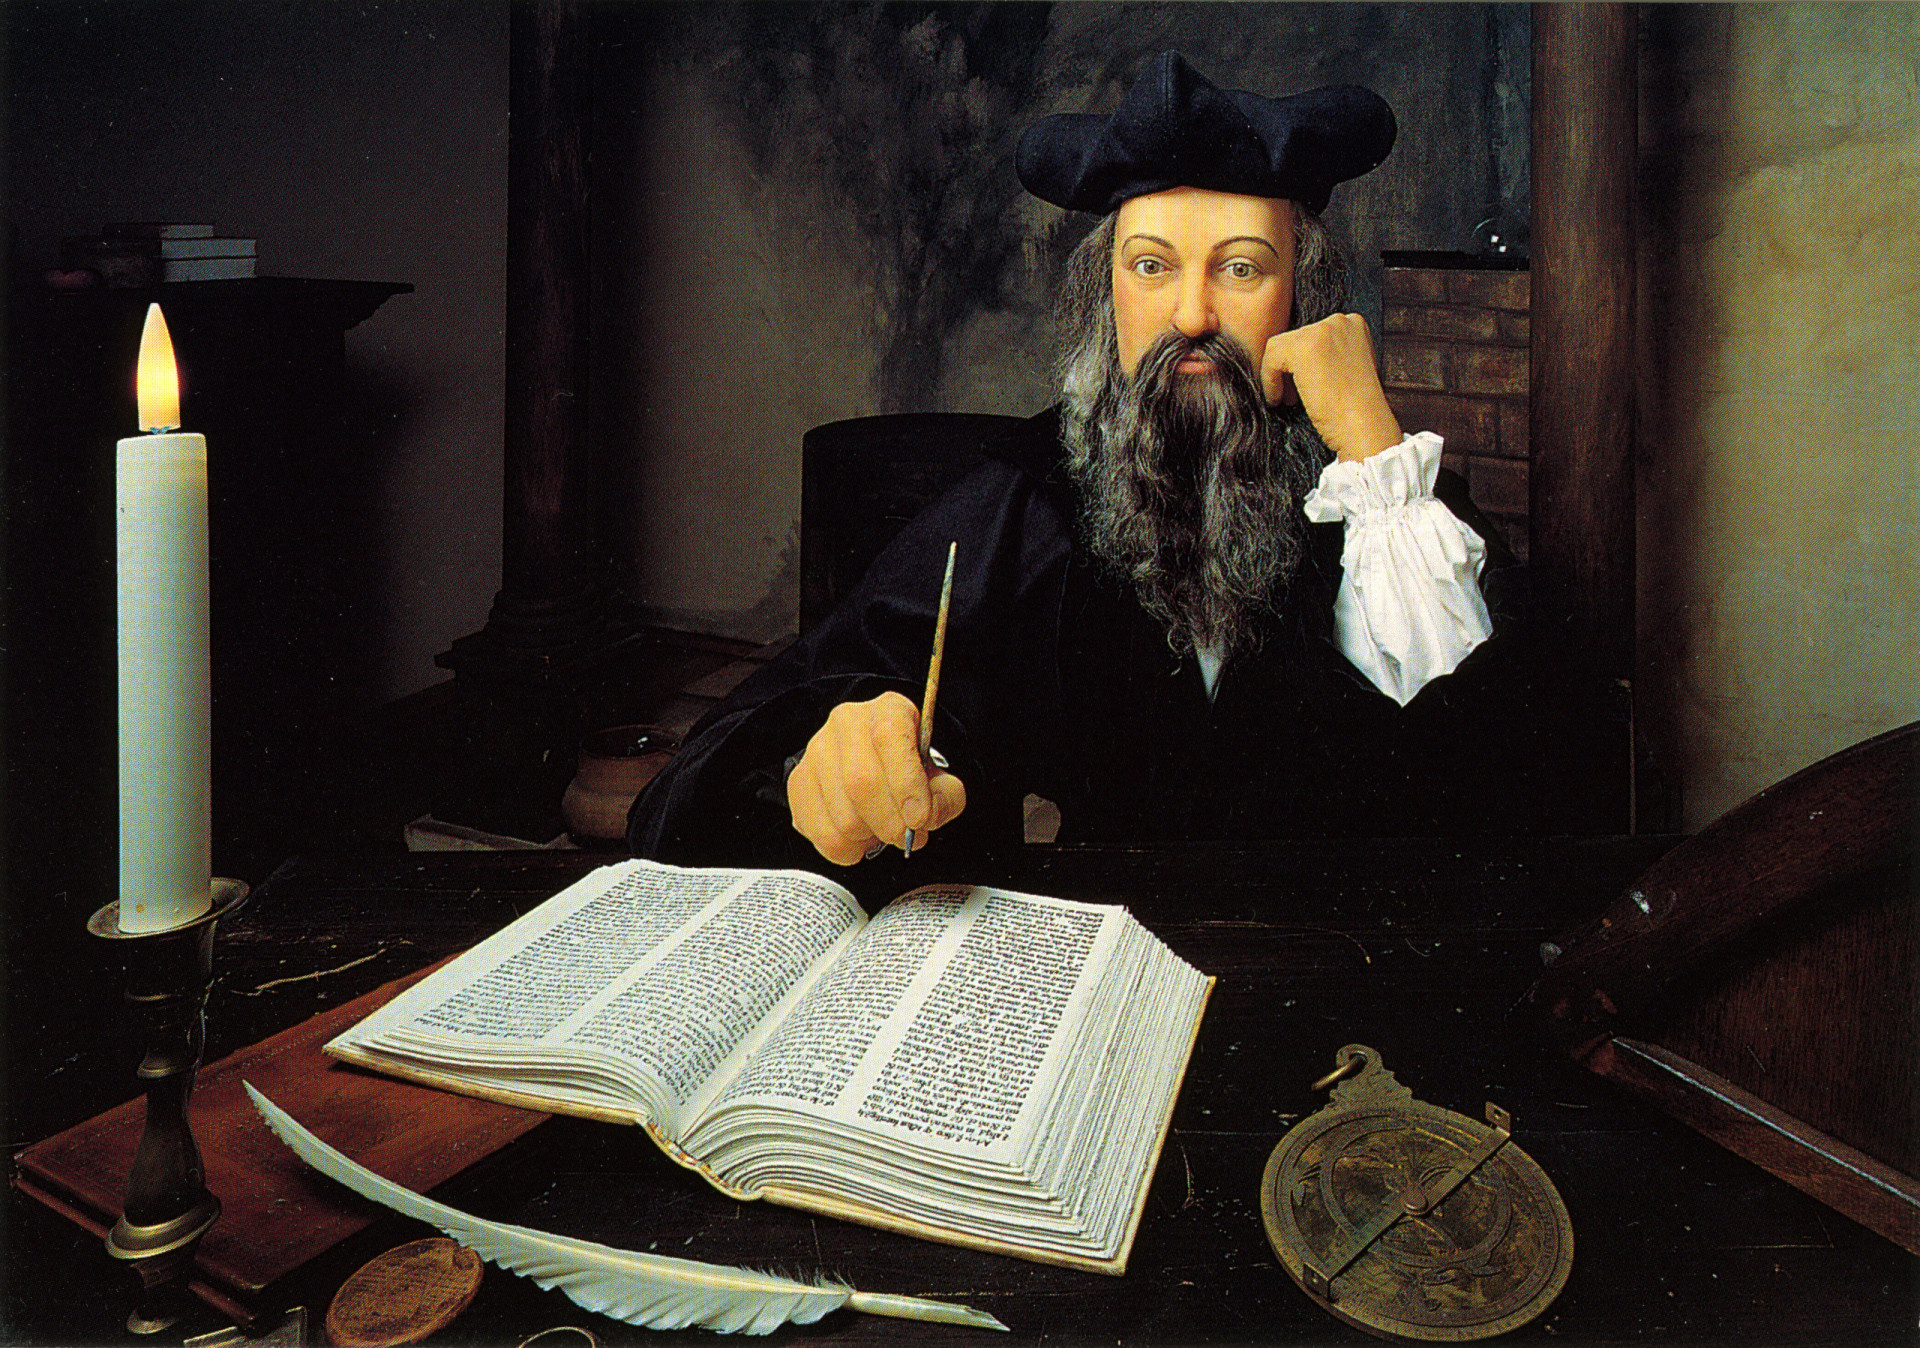 <p>Although we know him by just one name, he was actually born Michel de Nostredame. Nostradamus is the Latin form of his name. He was born on December 14, 1503, in the south of France in Saint-Rémy-de-Provence.</p><p><a href="https://www.msn.com/en-us/community/channel/vid-7xx8mnucu55yw63we9va2gwr7uihbxwc68fxqp25x6tg4ftibpra?cvid=94631541bc0f4f89bfd59158d696ad7e">Follow us and access great exclusive content every day</a></p>